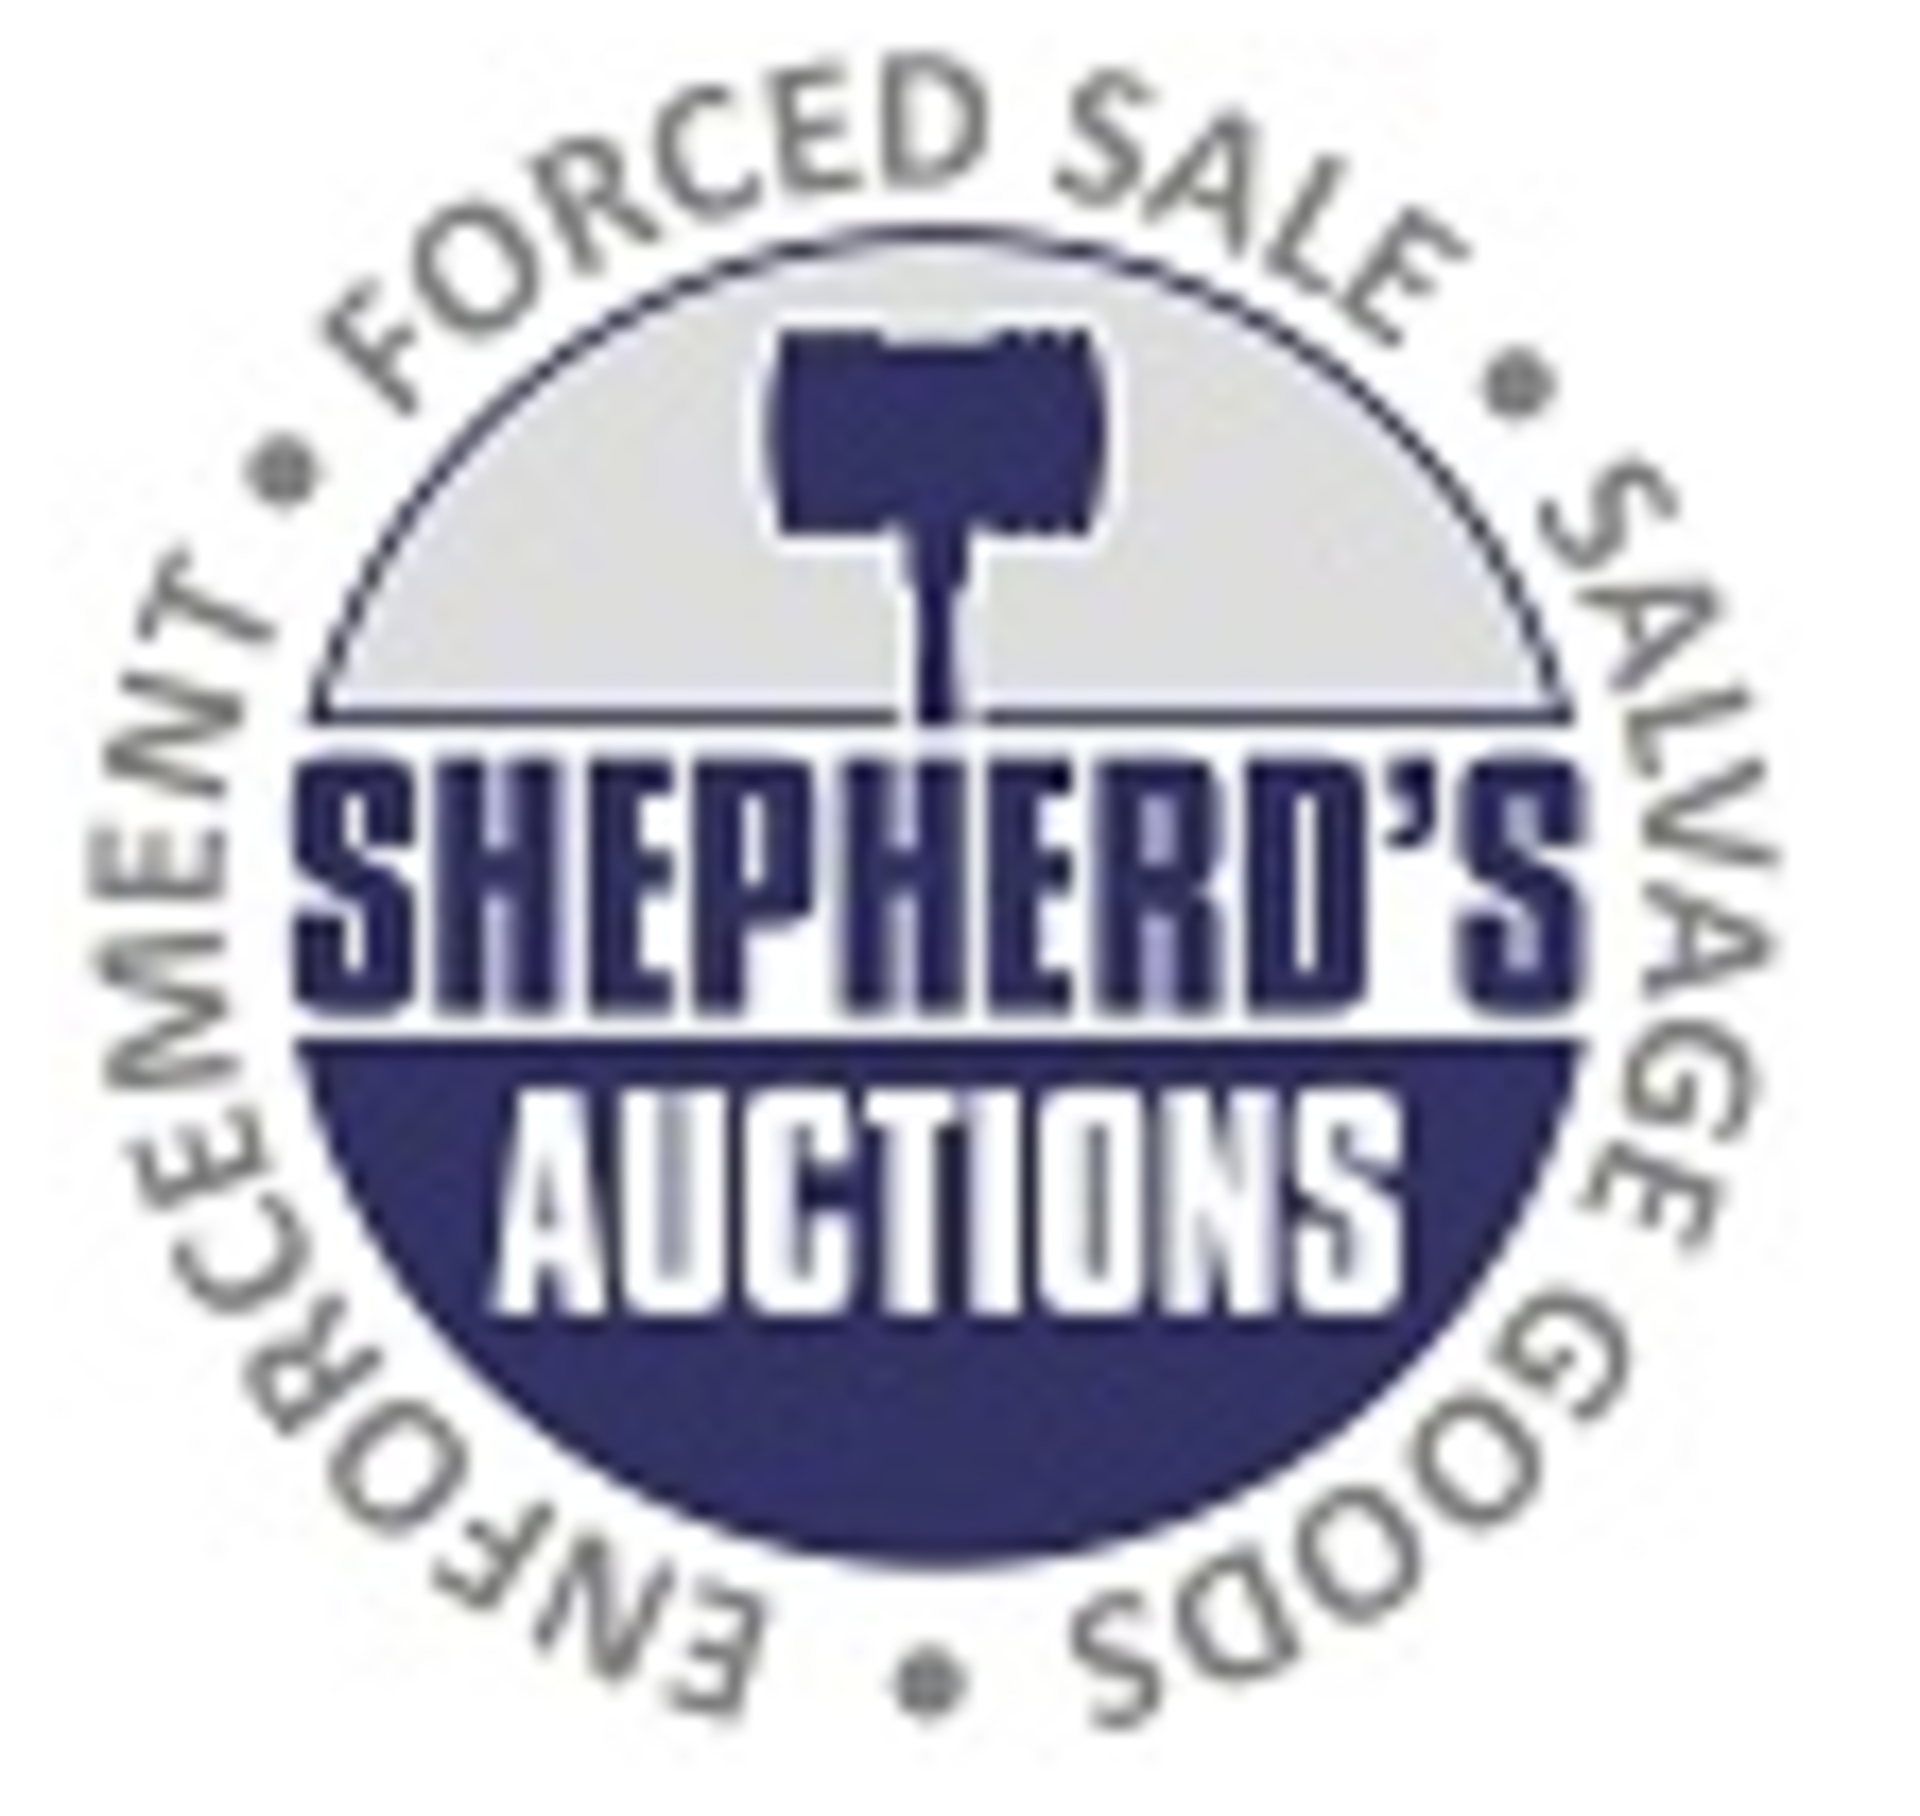 From 2015 all our auctions will now be timed. Please see full description for all info.